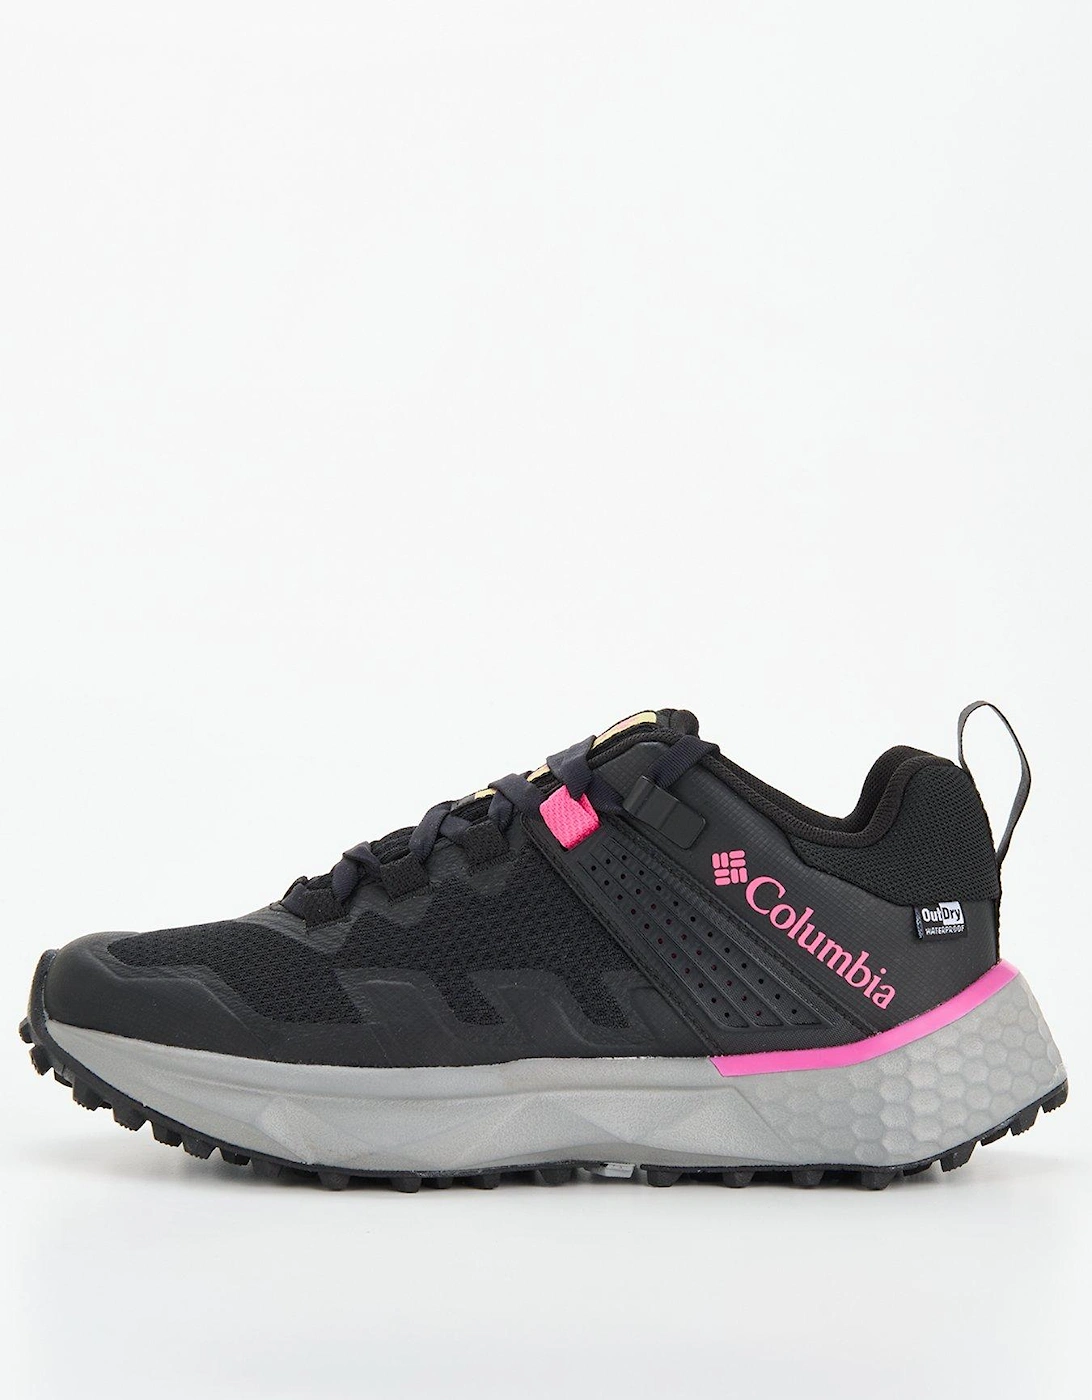 Womens Facet 75 Outdry Waterproof Hiking Shoes - Black/pink, 2 of 1